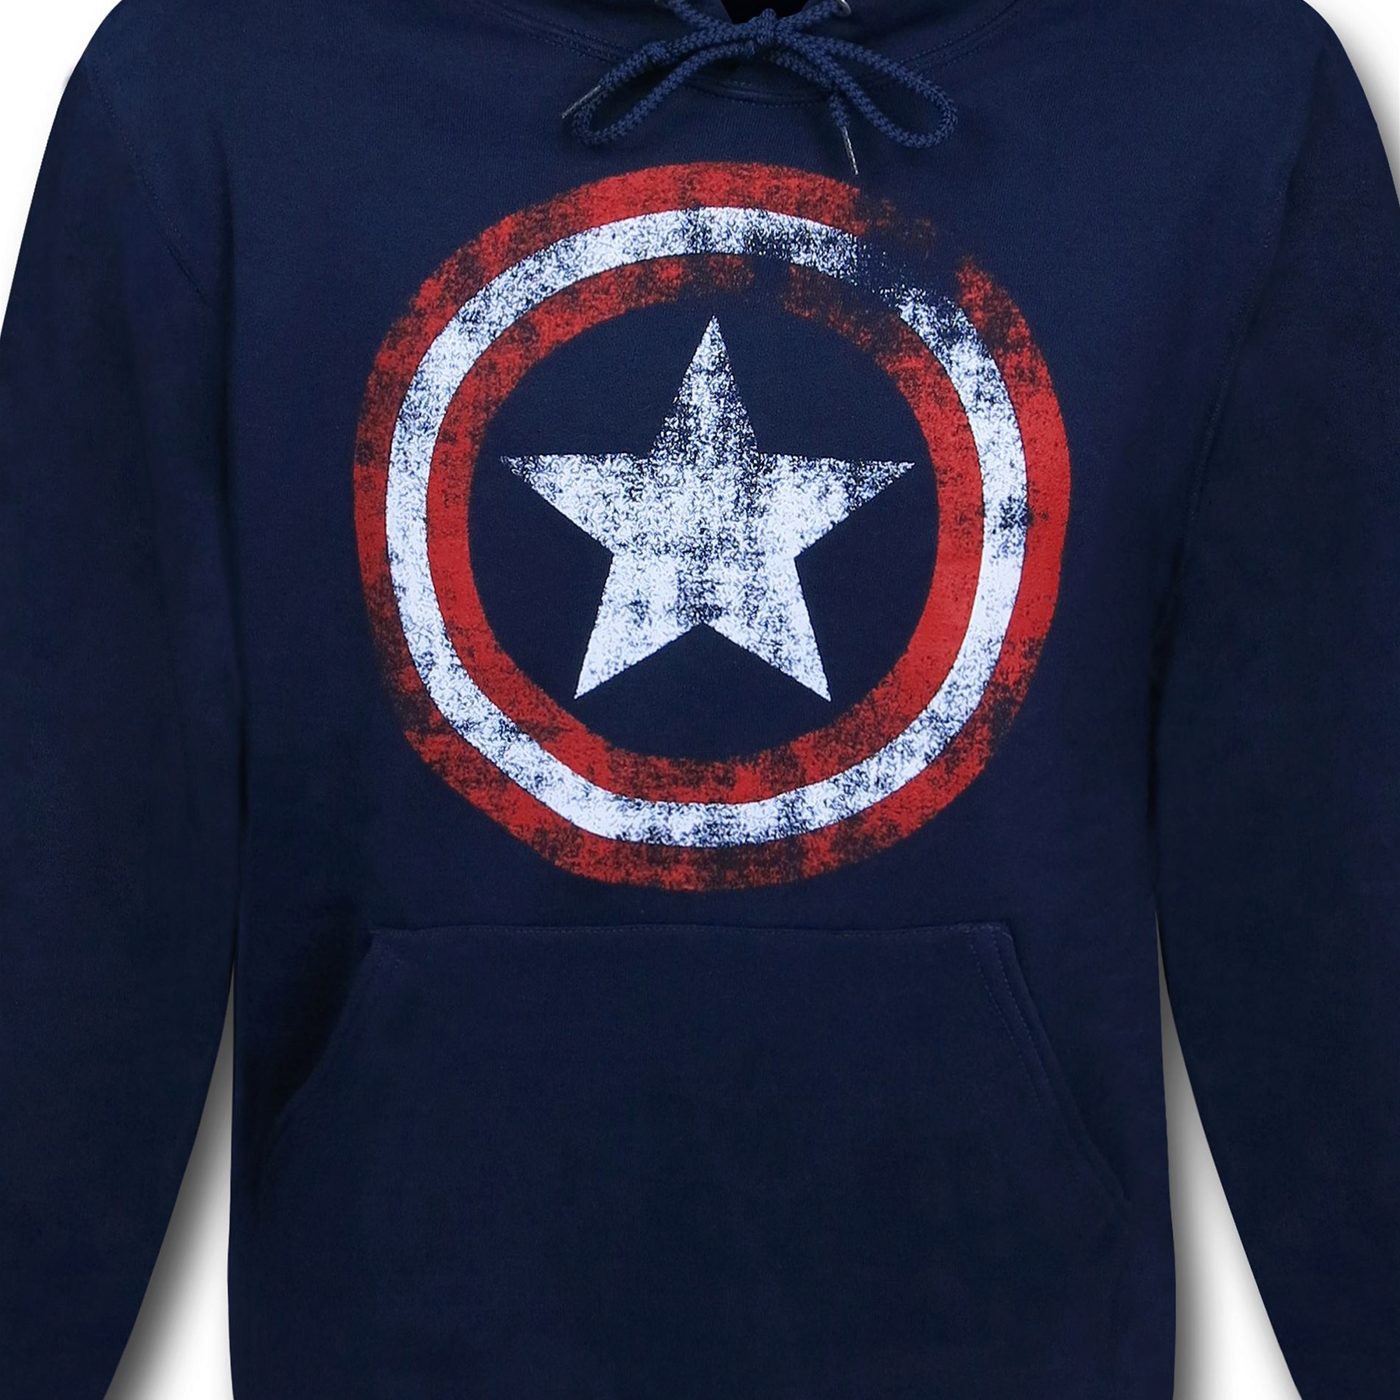 Captain America Distressed Navy Pullover Hoodie